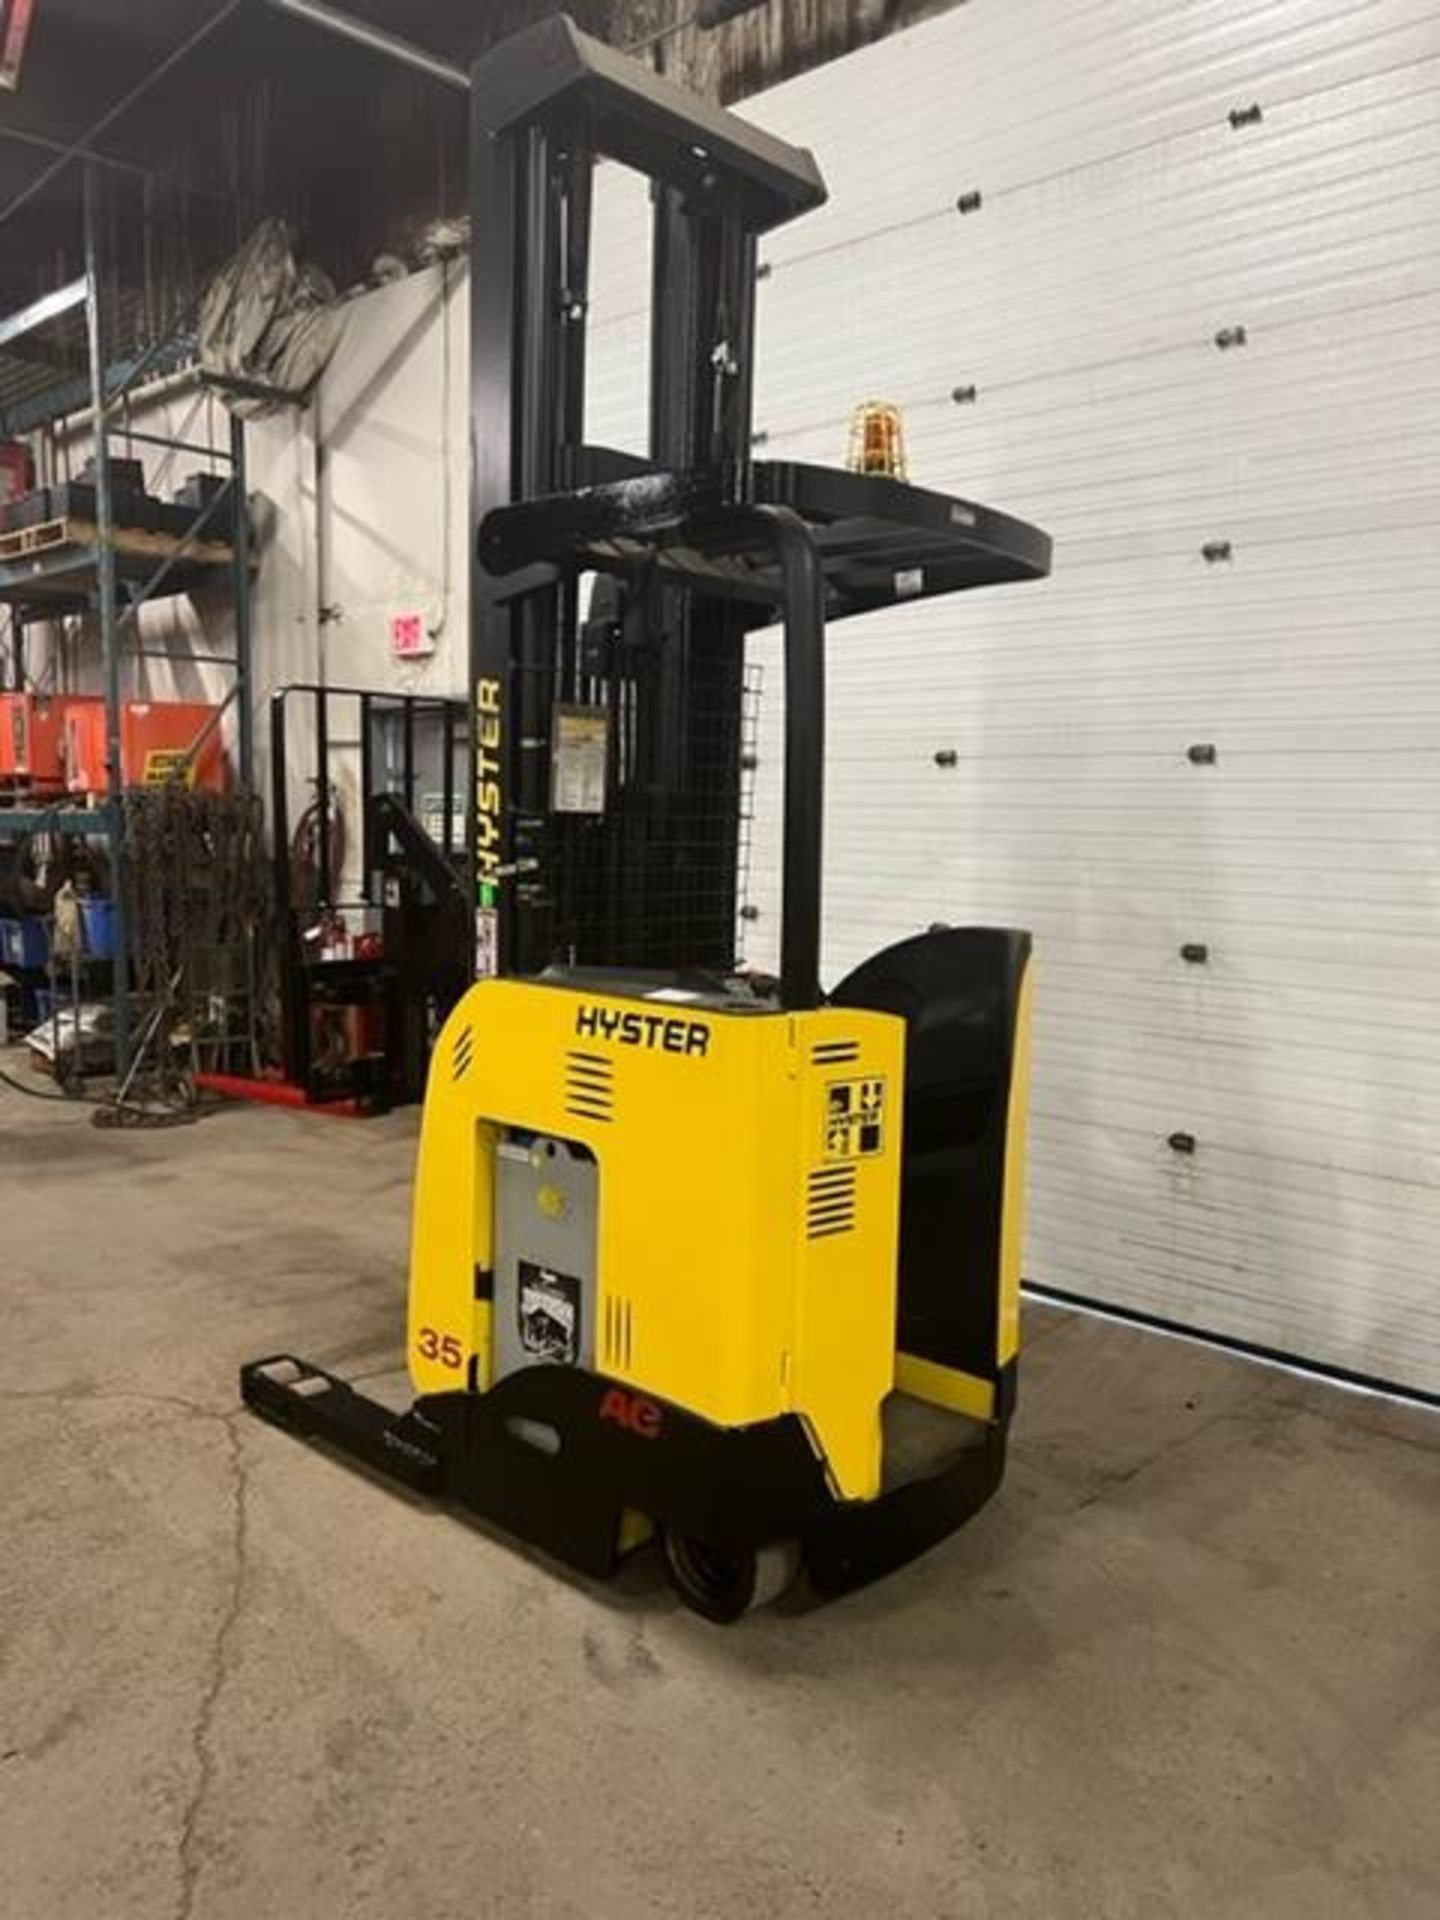 FREE CUSTOMS - 2014 Hyster 35 Reach Truck Pallet Lifter 3500lbs capacity electric MINT machine - Image 3 of 3